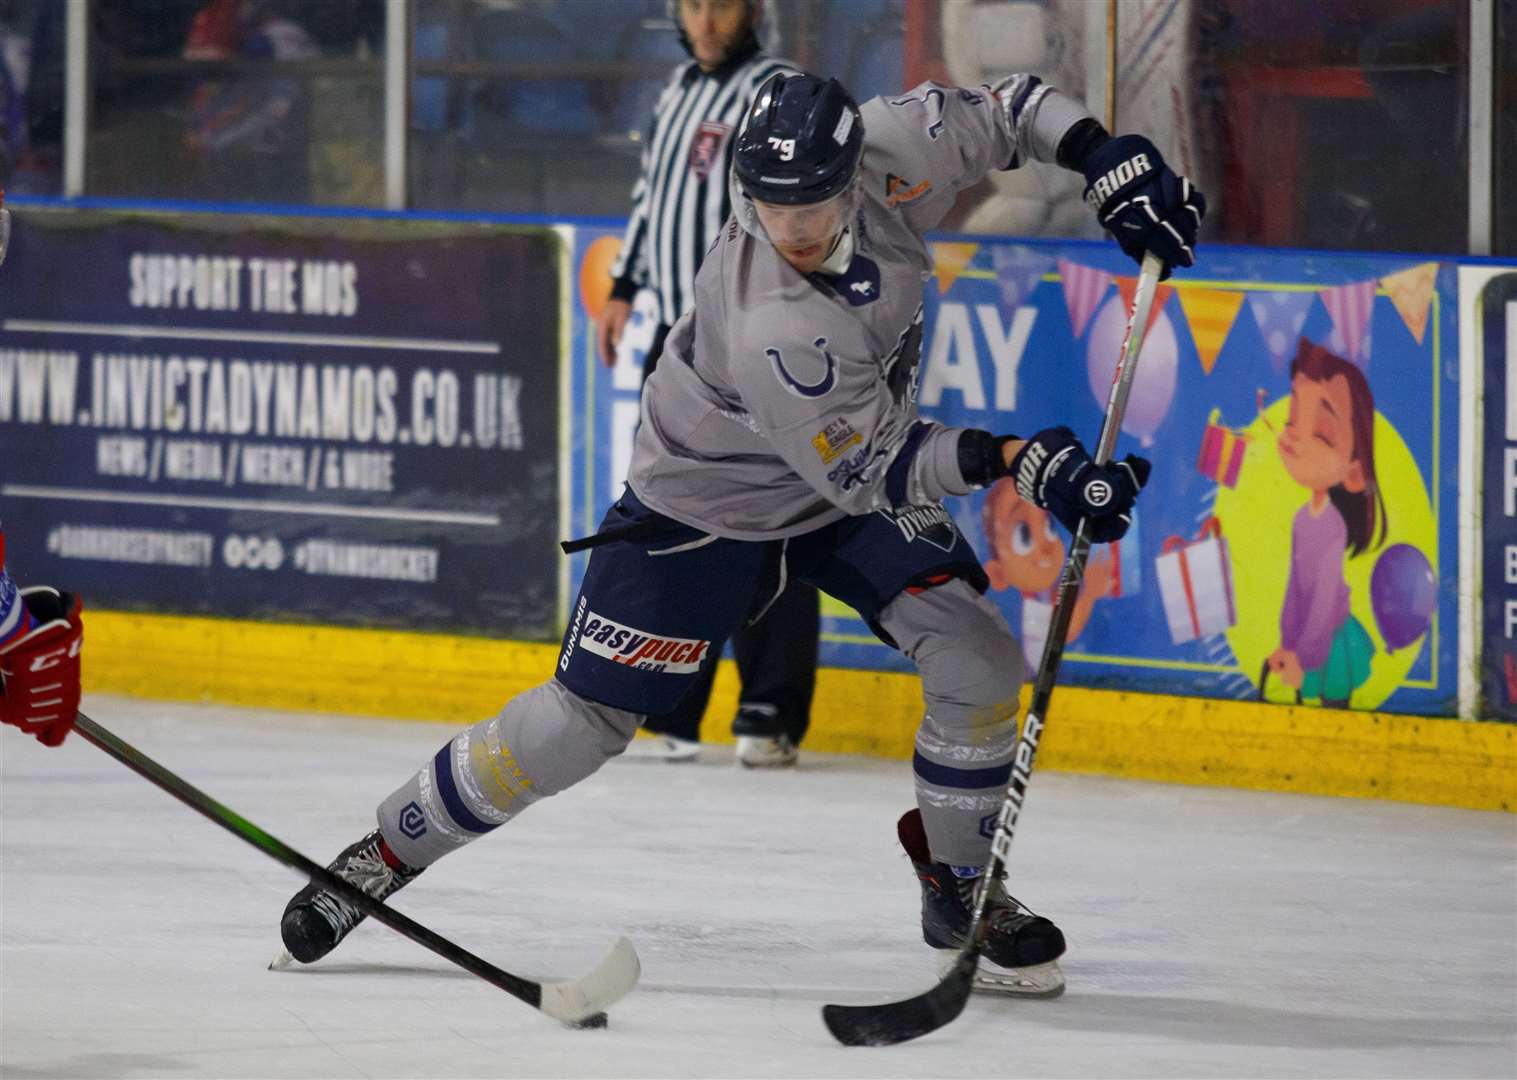 Tom Soar was on the scoresheet home and away against the Slough Jets Picture: David Trevallion